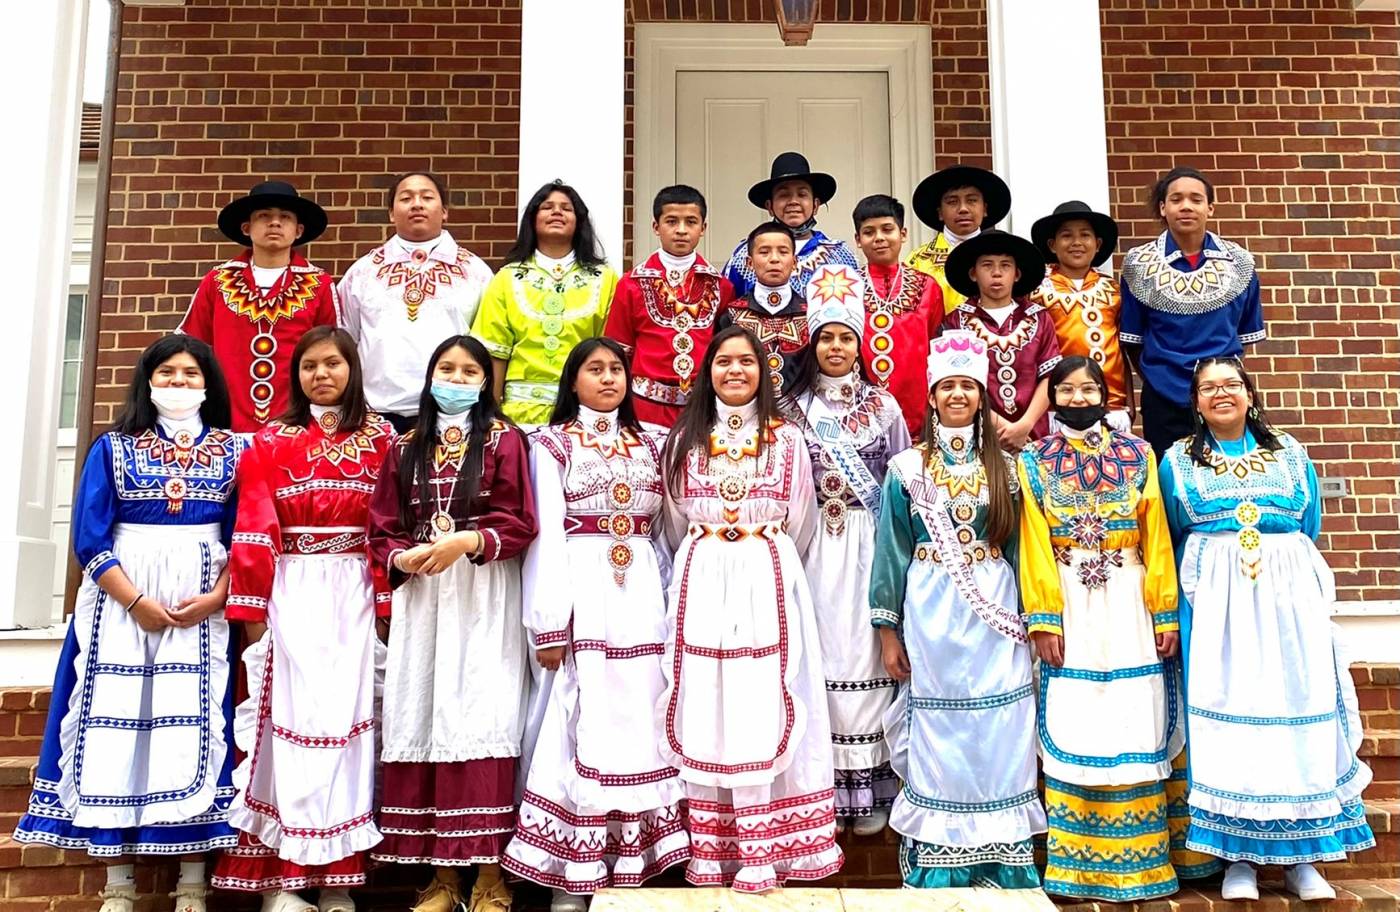 The first Choctaw Expressions at Mississippi College will include traditional social dances by members of the Boys and Girls Club Chahta Alla Hapiya Dancers.